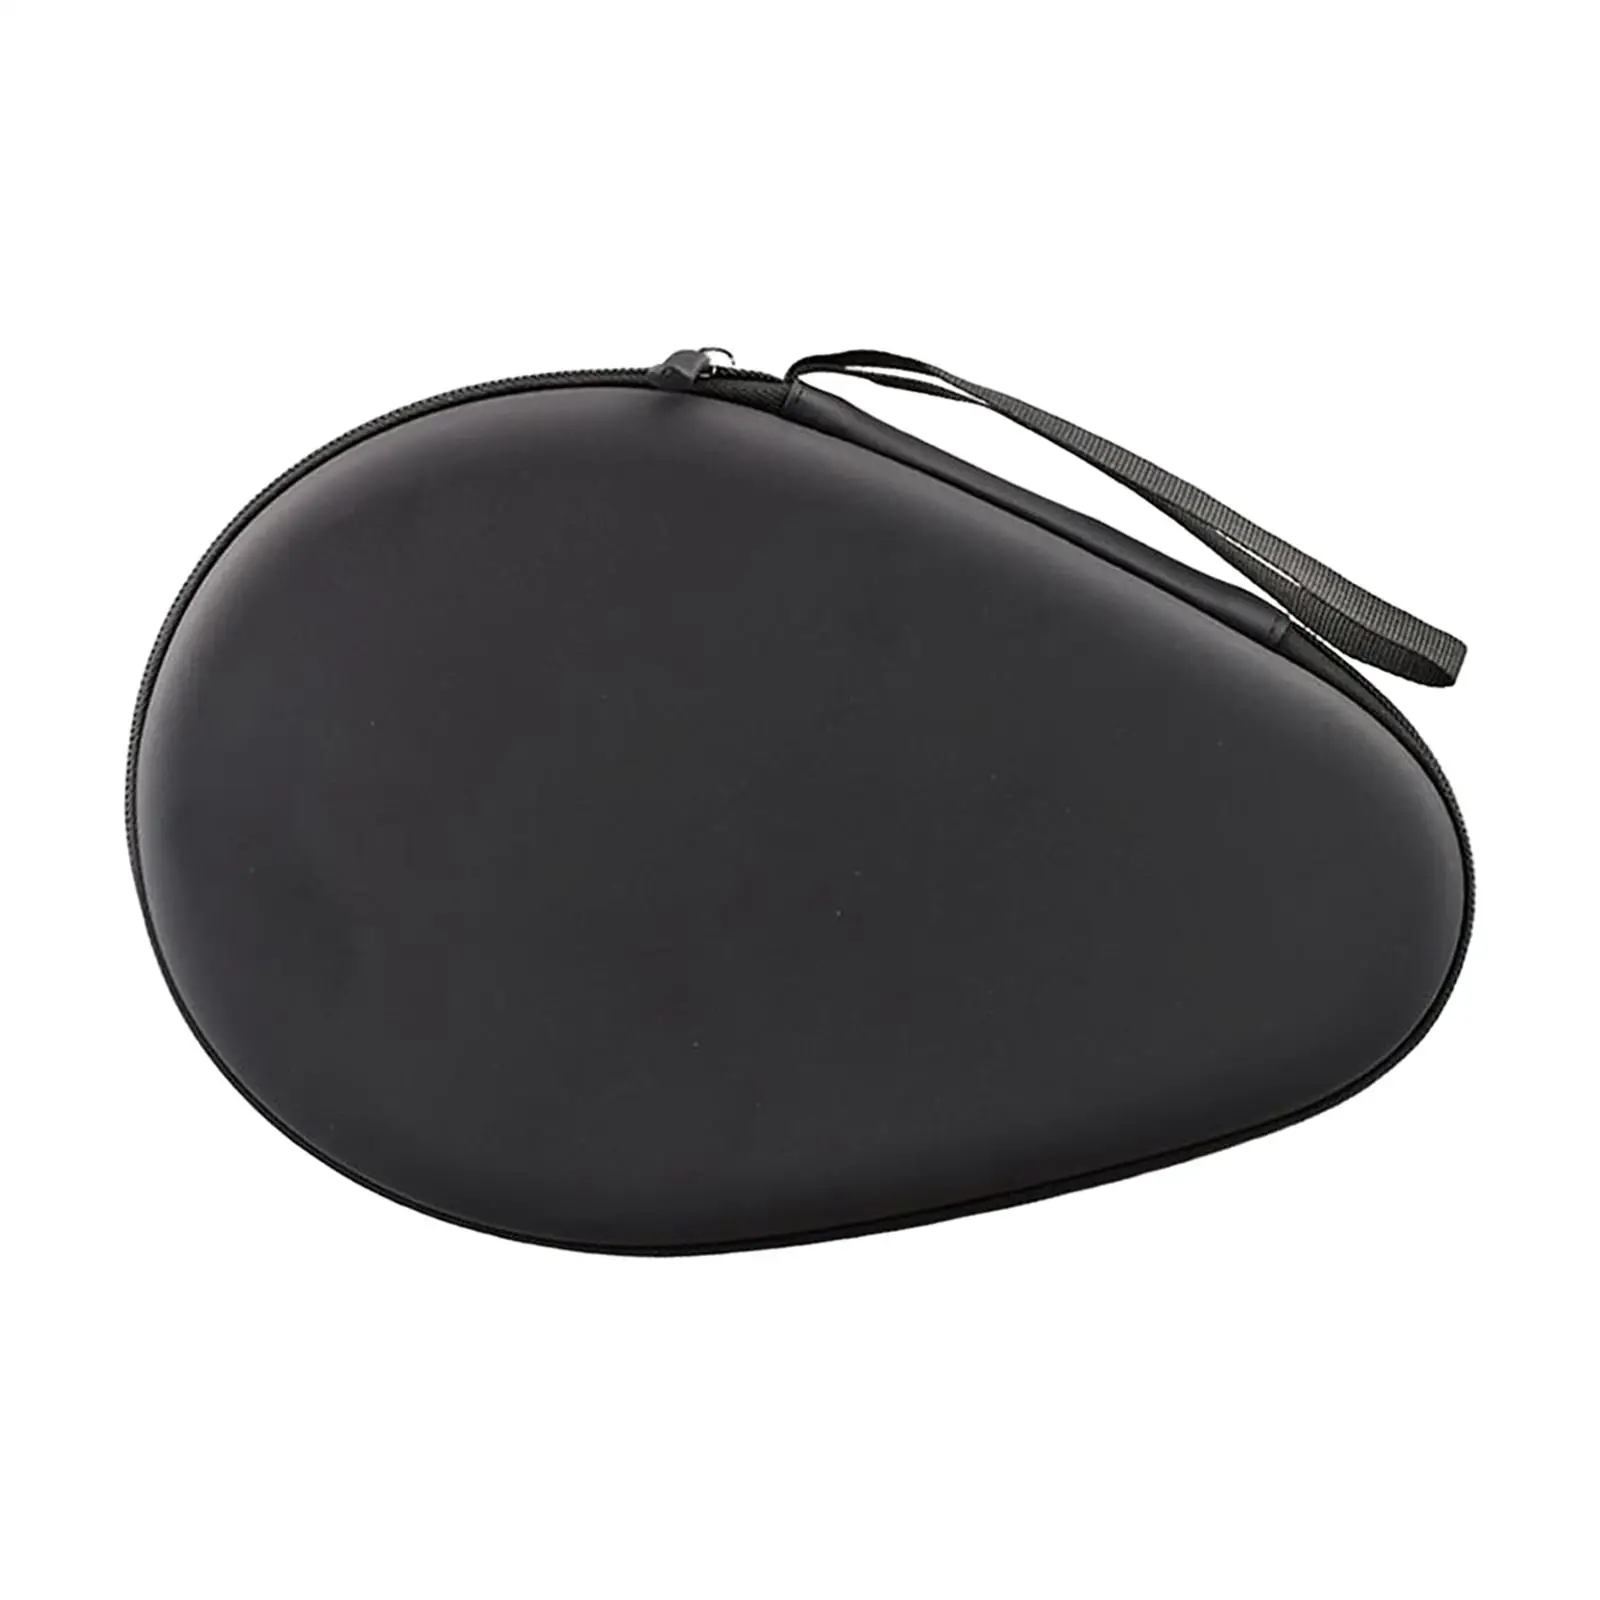 Professional Table Tennis Racket Case Lightweight Reusable Hard Gourd Sturdy Ping Pong Paddle Pocket for Training Outdoor Travel